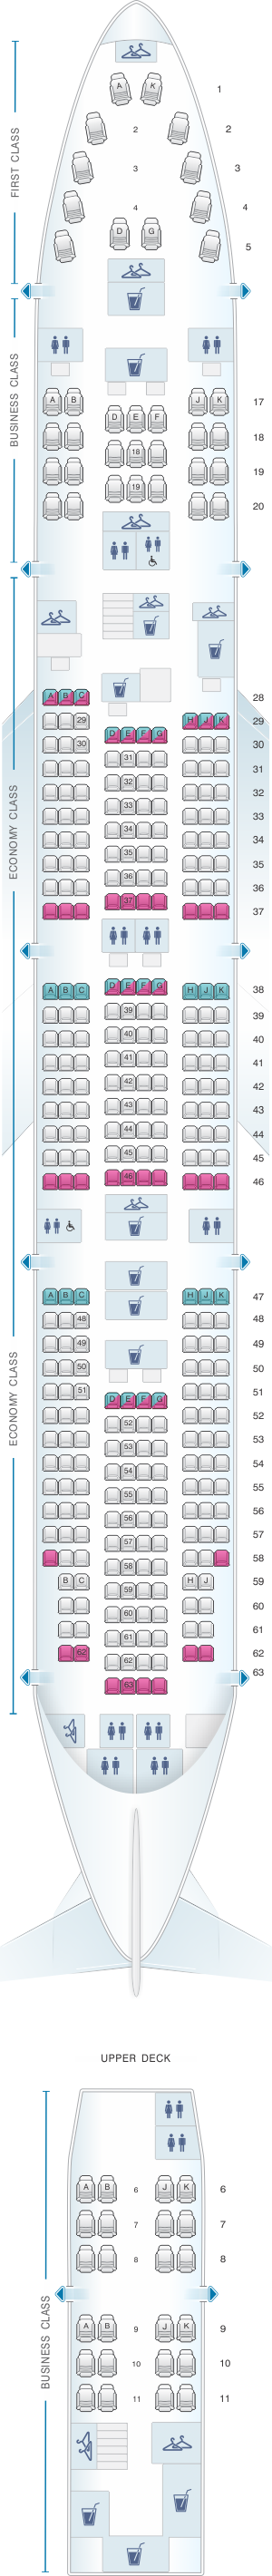 Seat map for China Airlines Boeing B747 400 380PAX